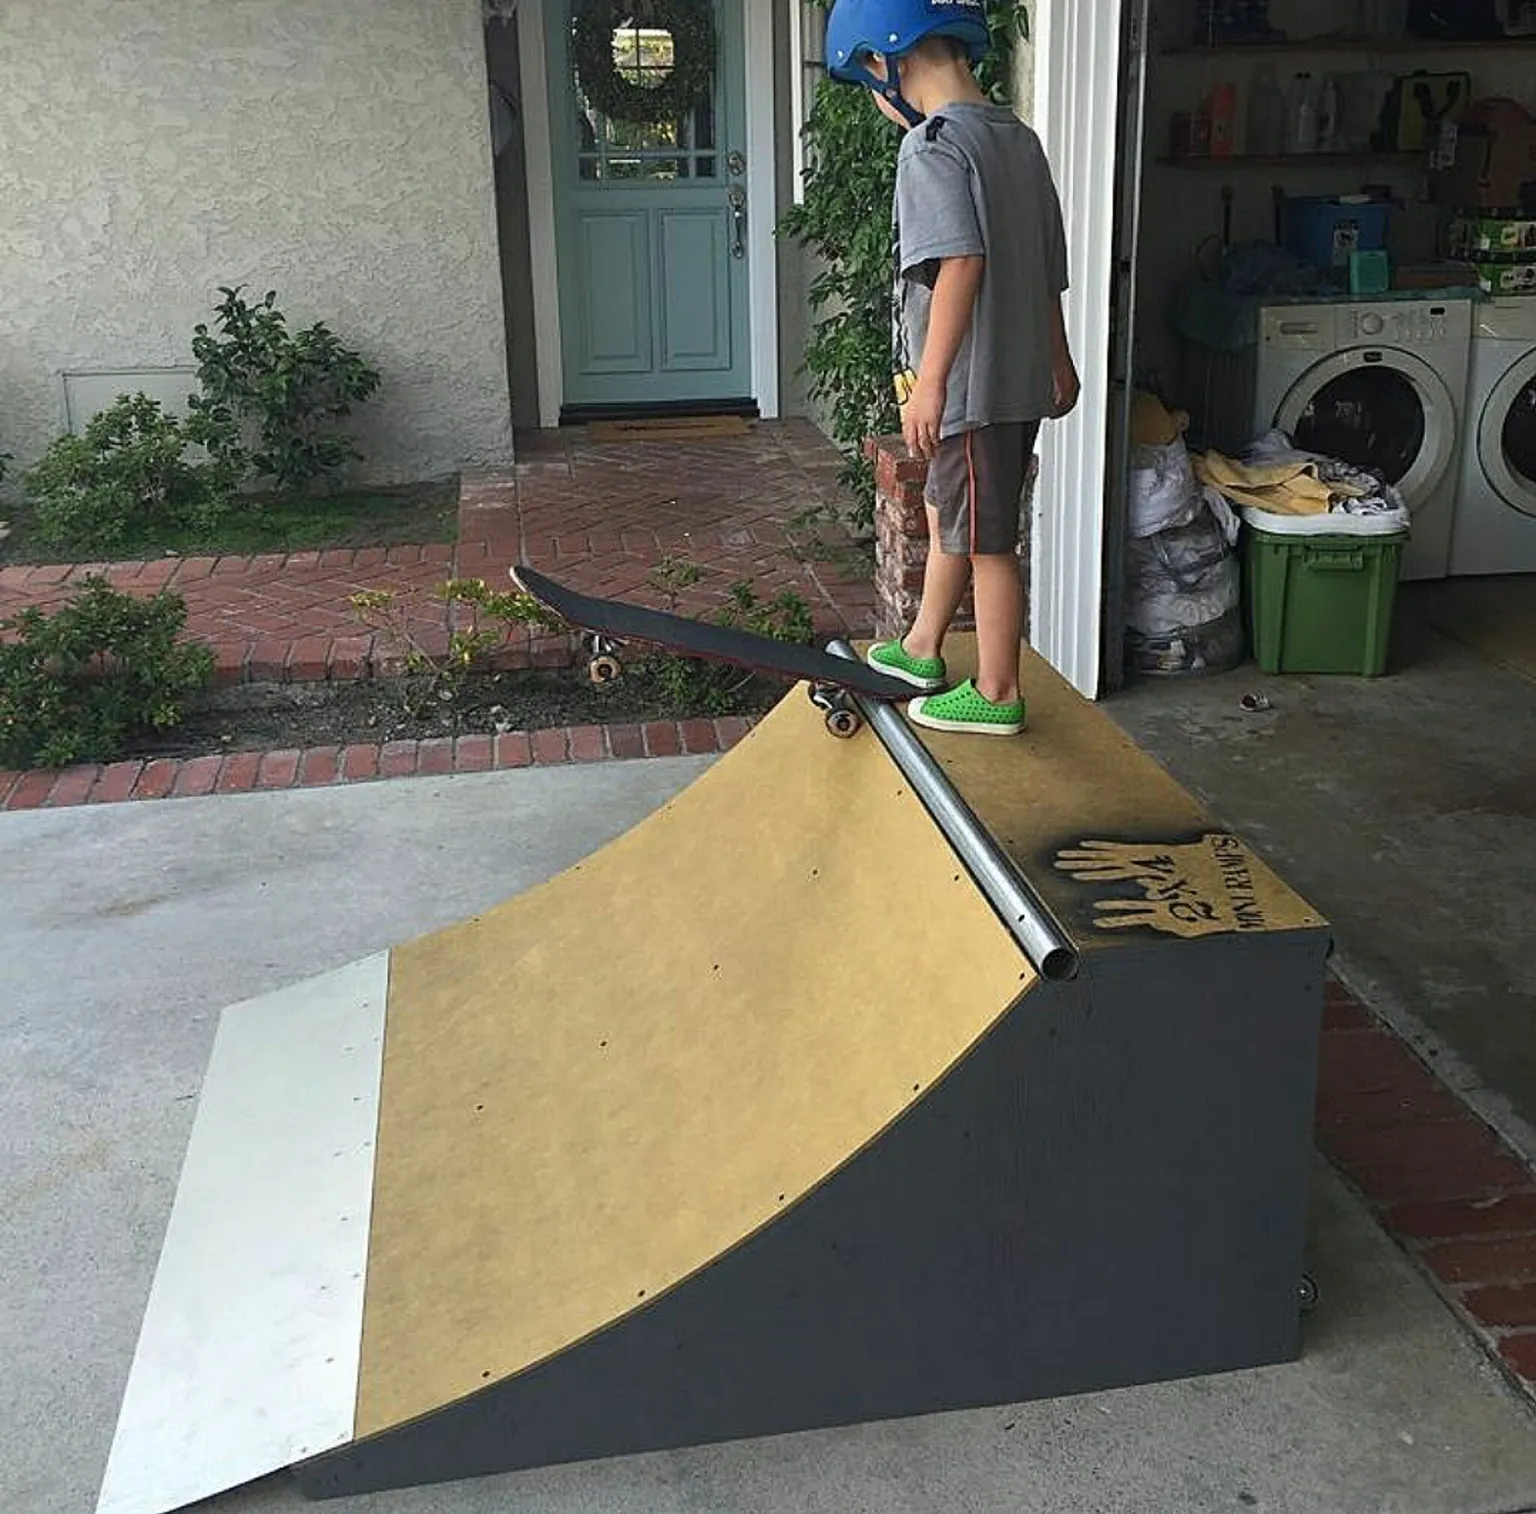 Child on deck of two foot high by four foot wide quarter pipe, preparing to drop in